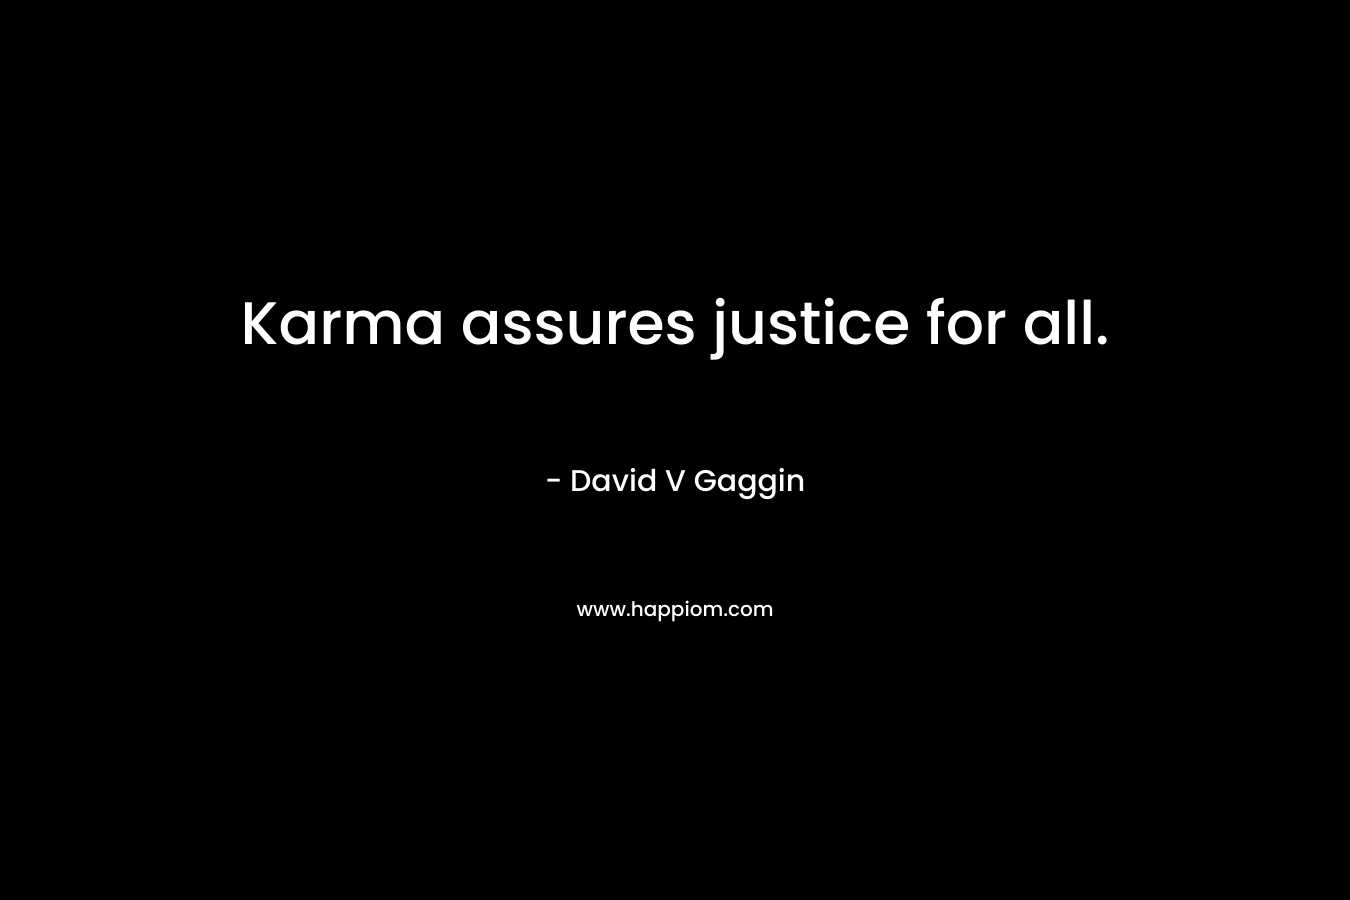 Karma assures justice for all.